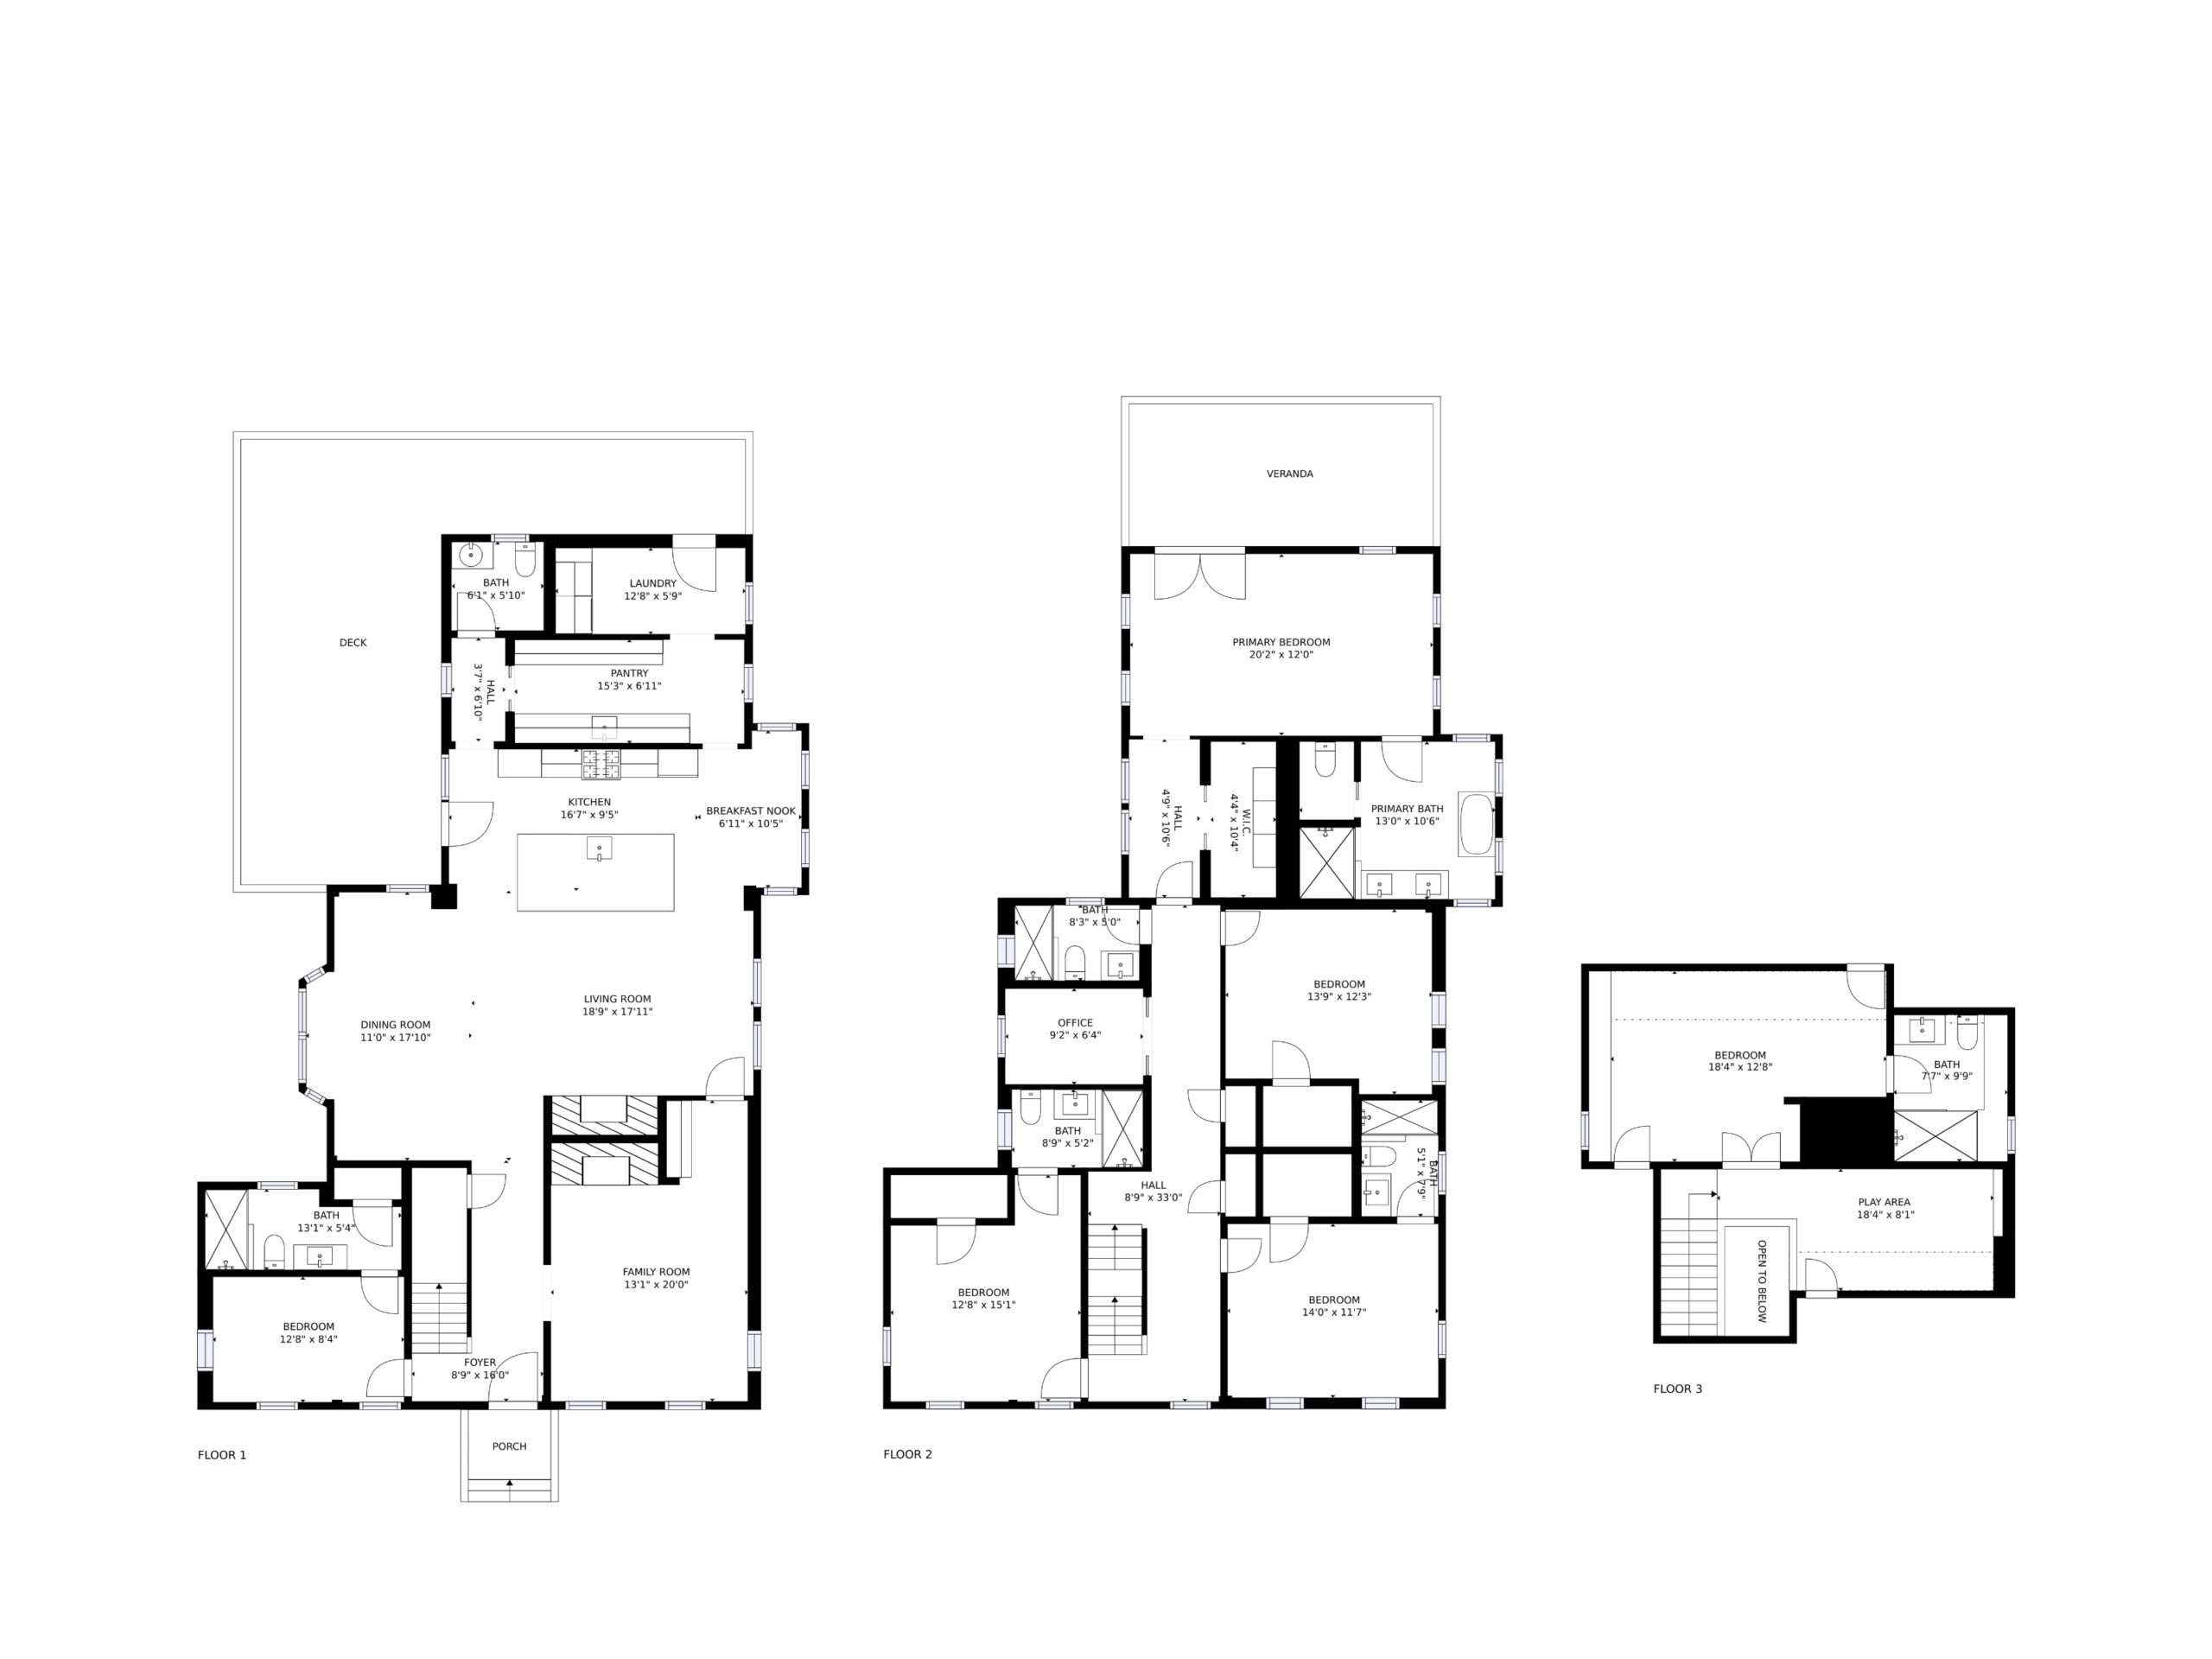 Detailed floor plan of a Nantucket real estate property.